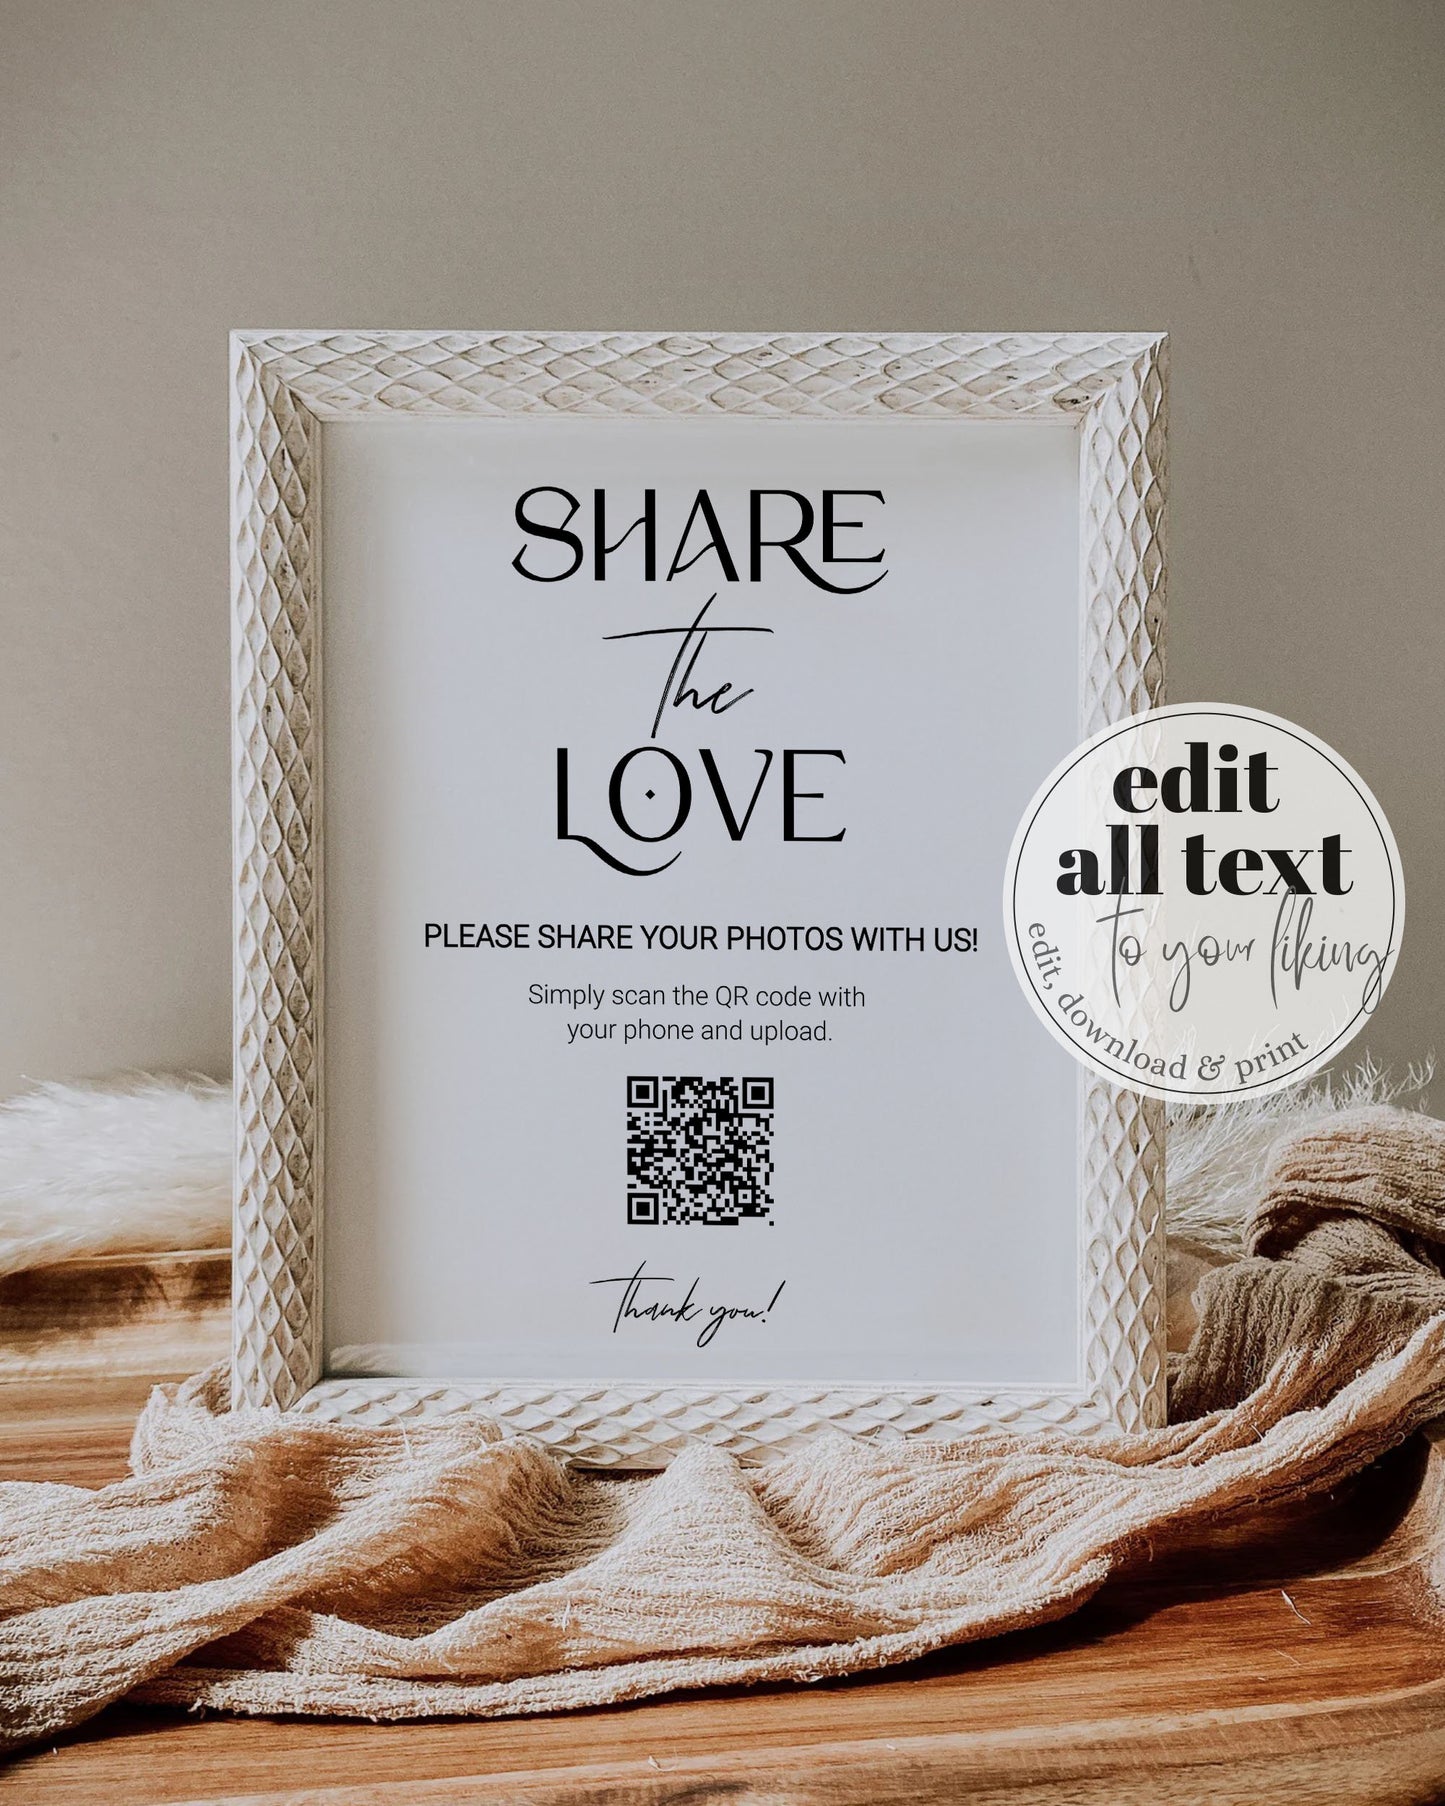 BOHO QR Code Sign "Capture the LOVE" | Share the Love Wedding Decor Signage | Snap a Photo Wedding qr Code | Printable Template #023